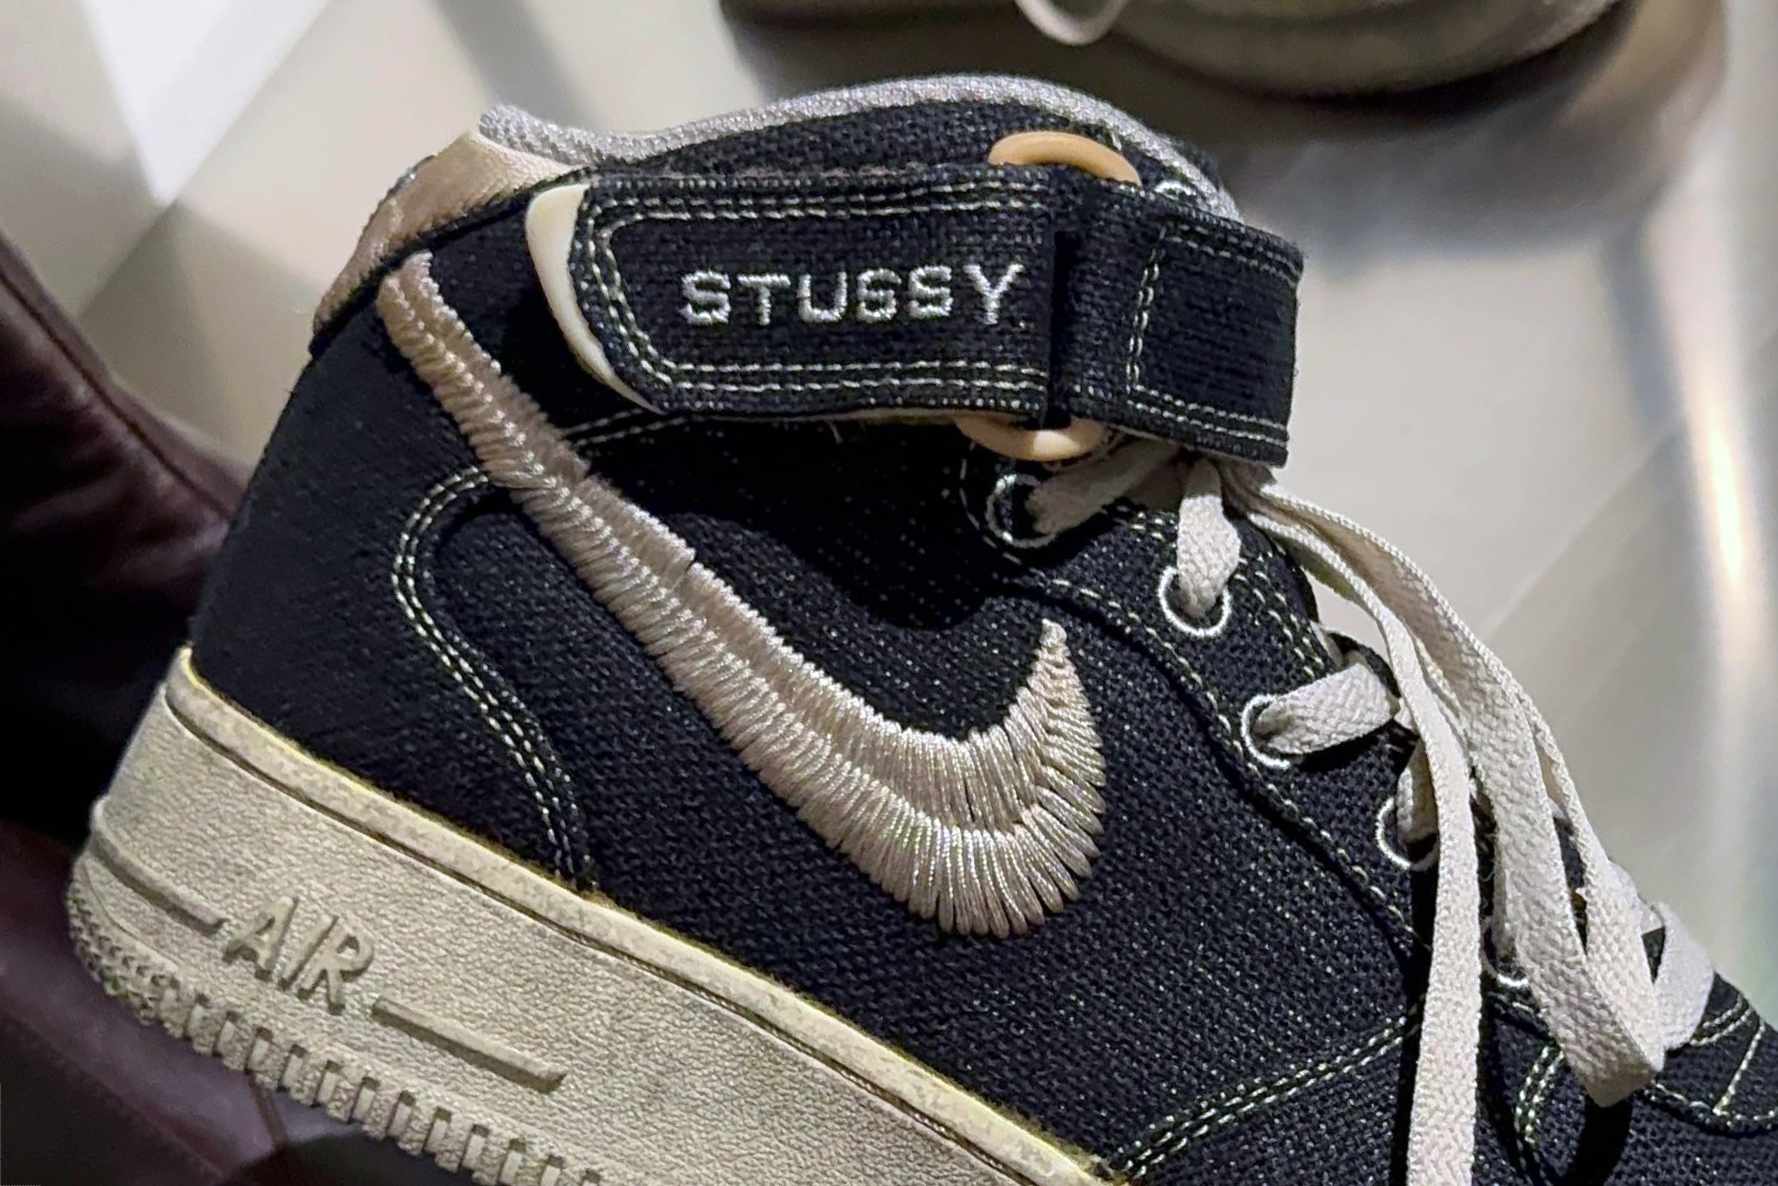 In-hand photos of Stussy & Nike's dyed Air Force 1 Mid sneaker